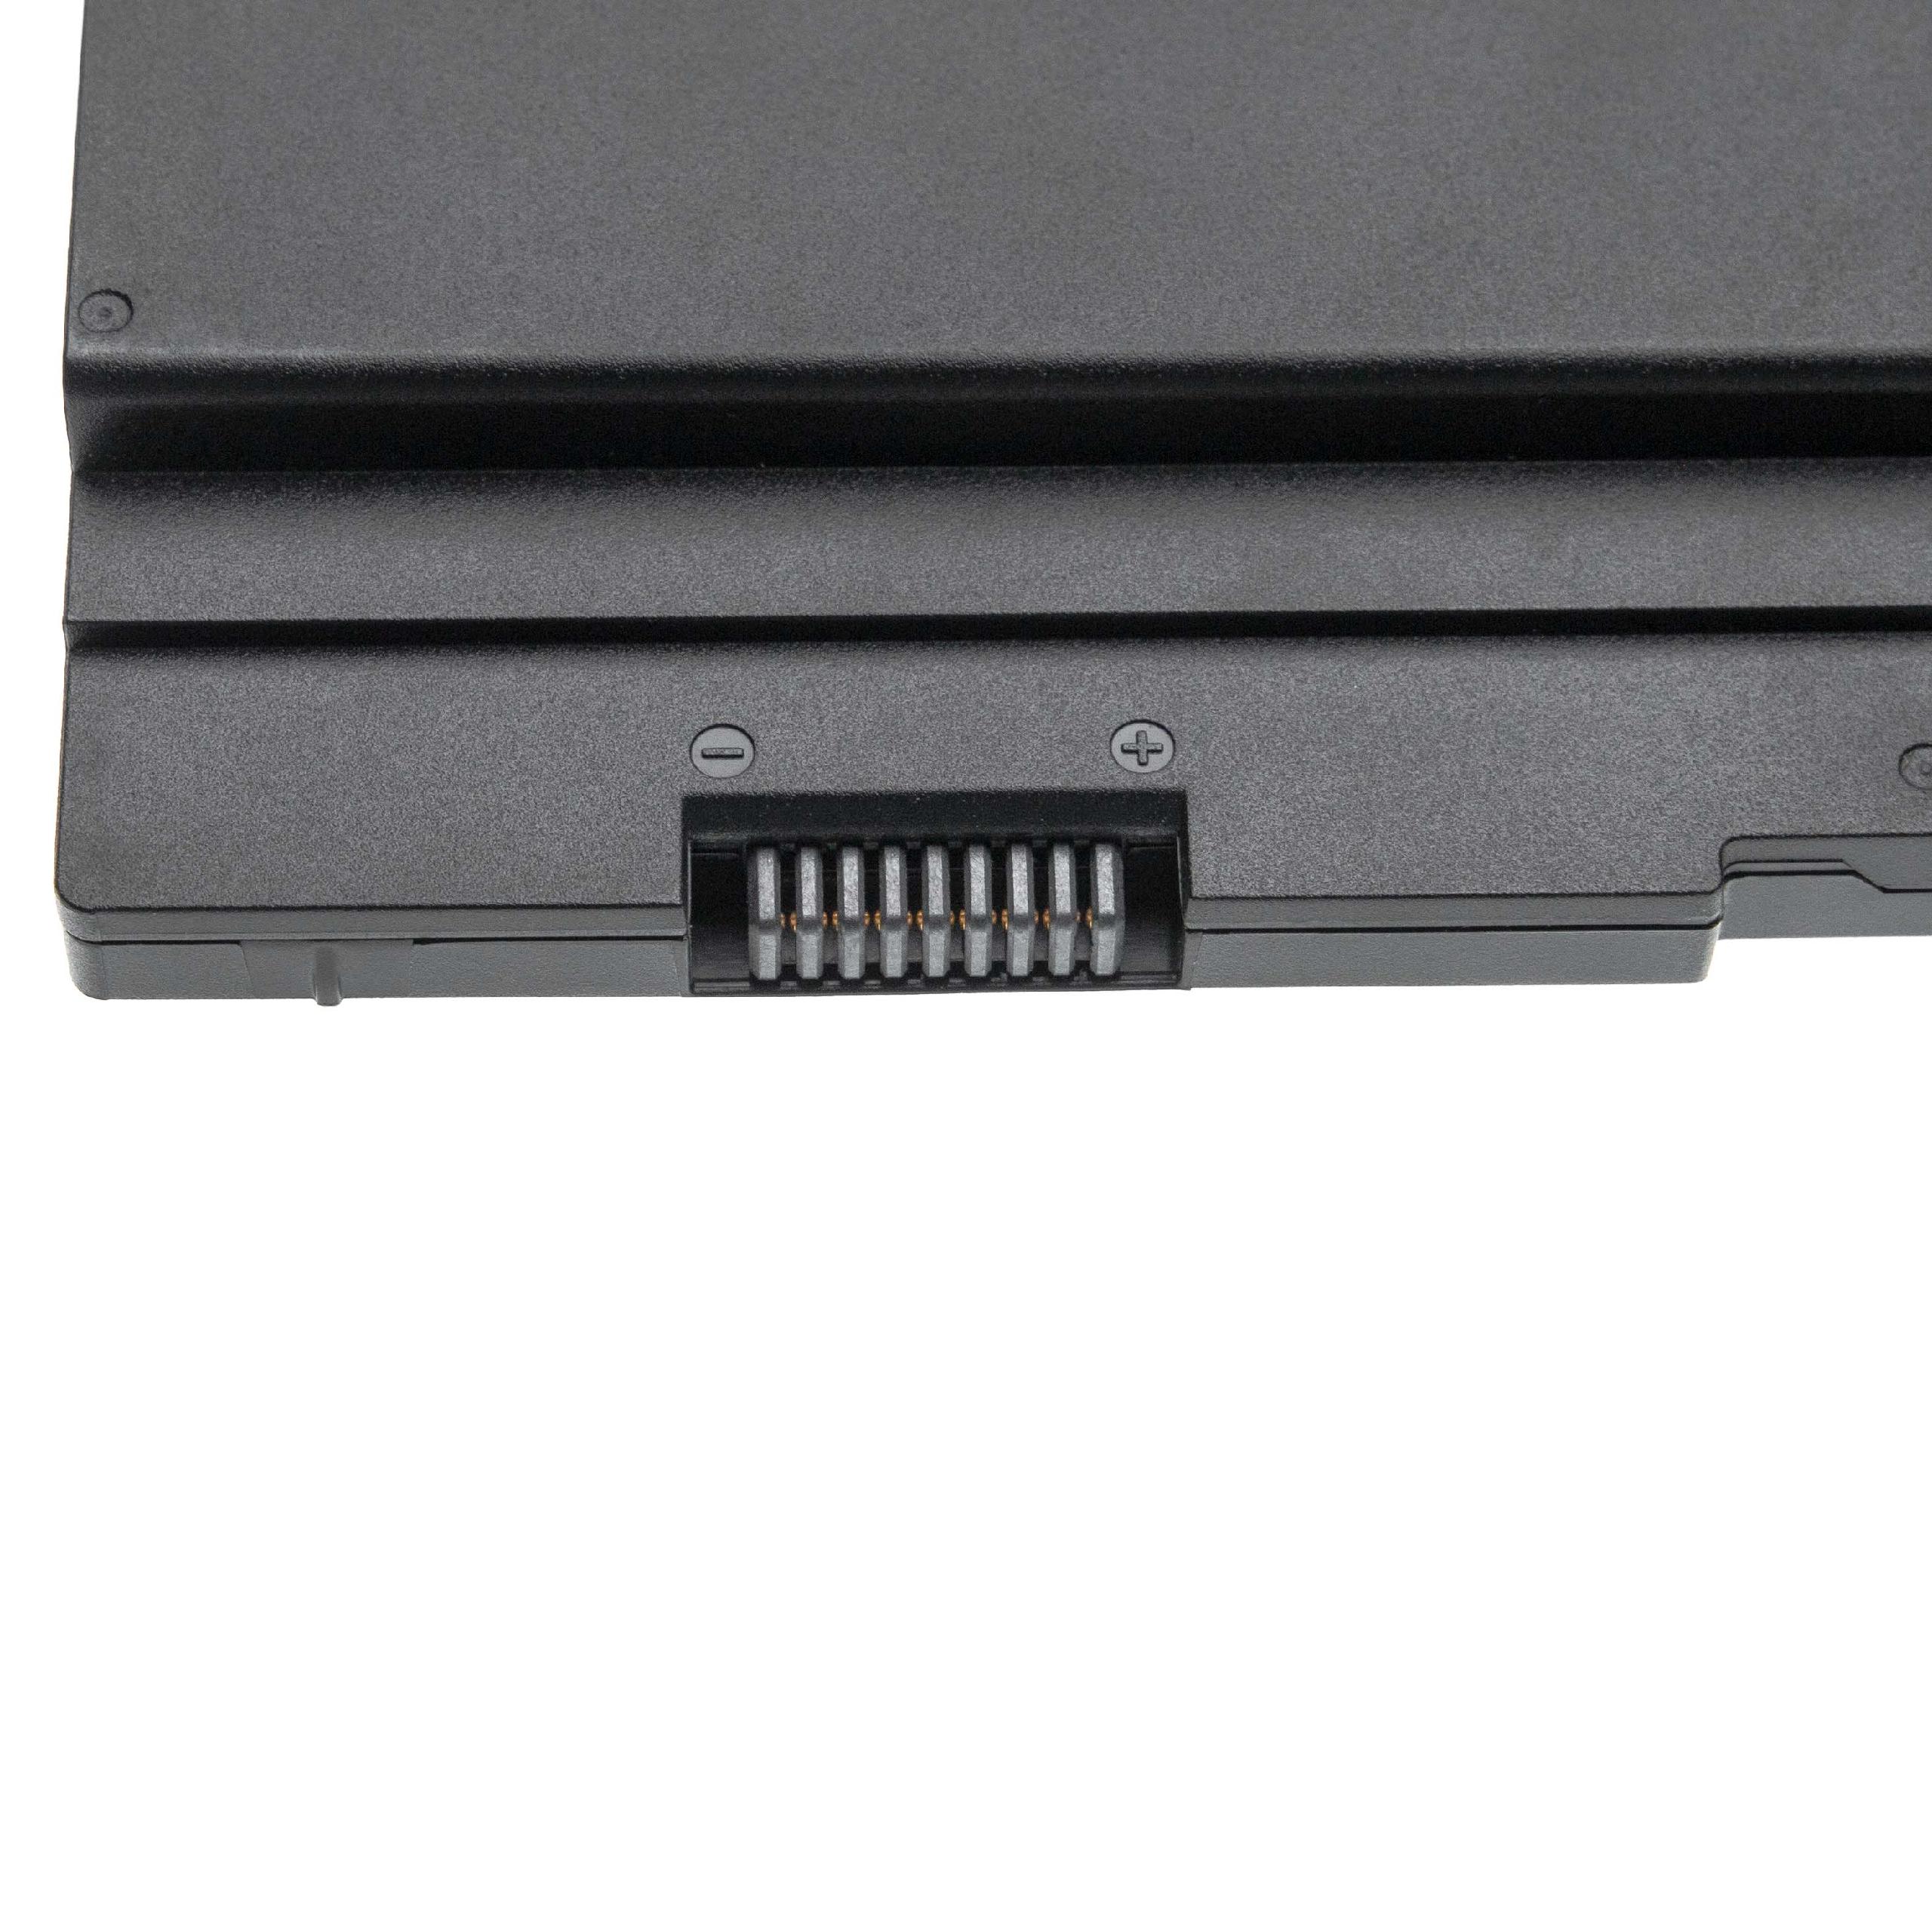 Notebook Battery Replacement for HP 852527-221, 852527-242, 852711-850, AA06XL - 8300mAh 11.4V Li-Ion, black